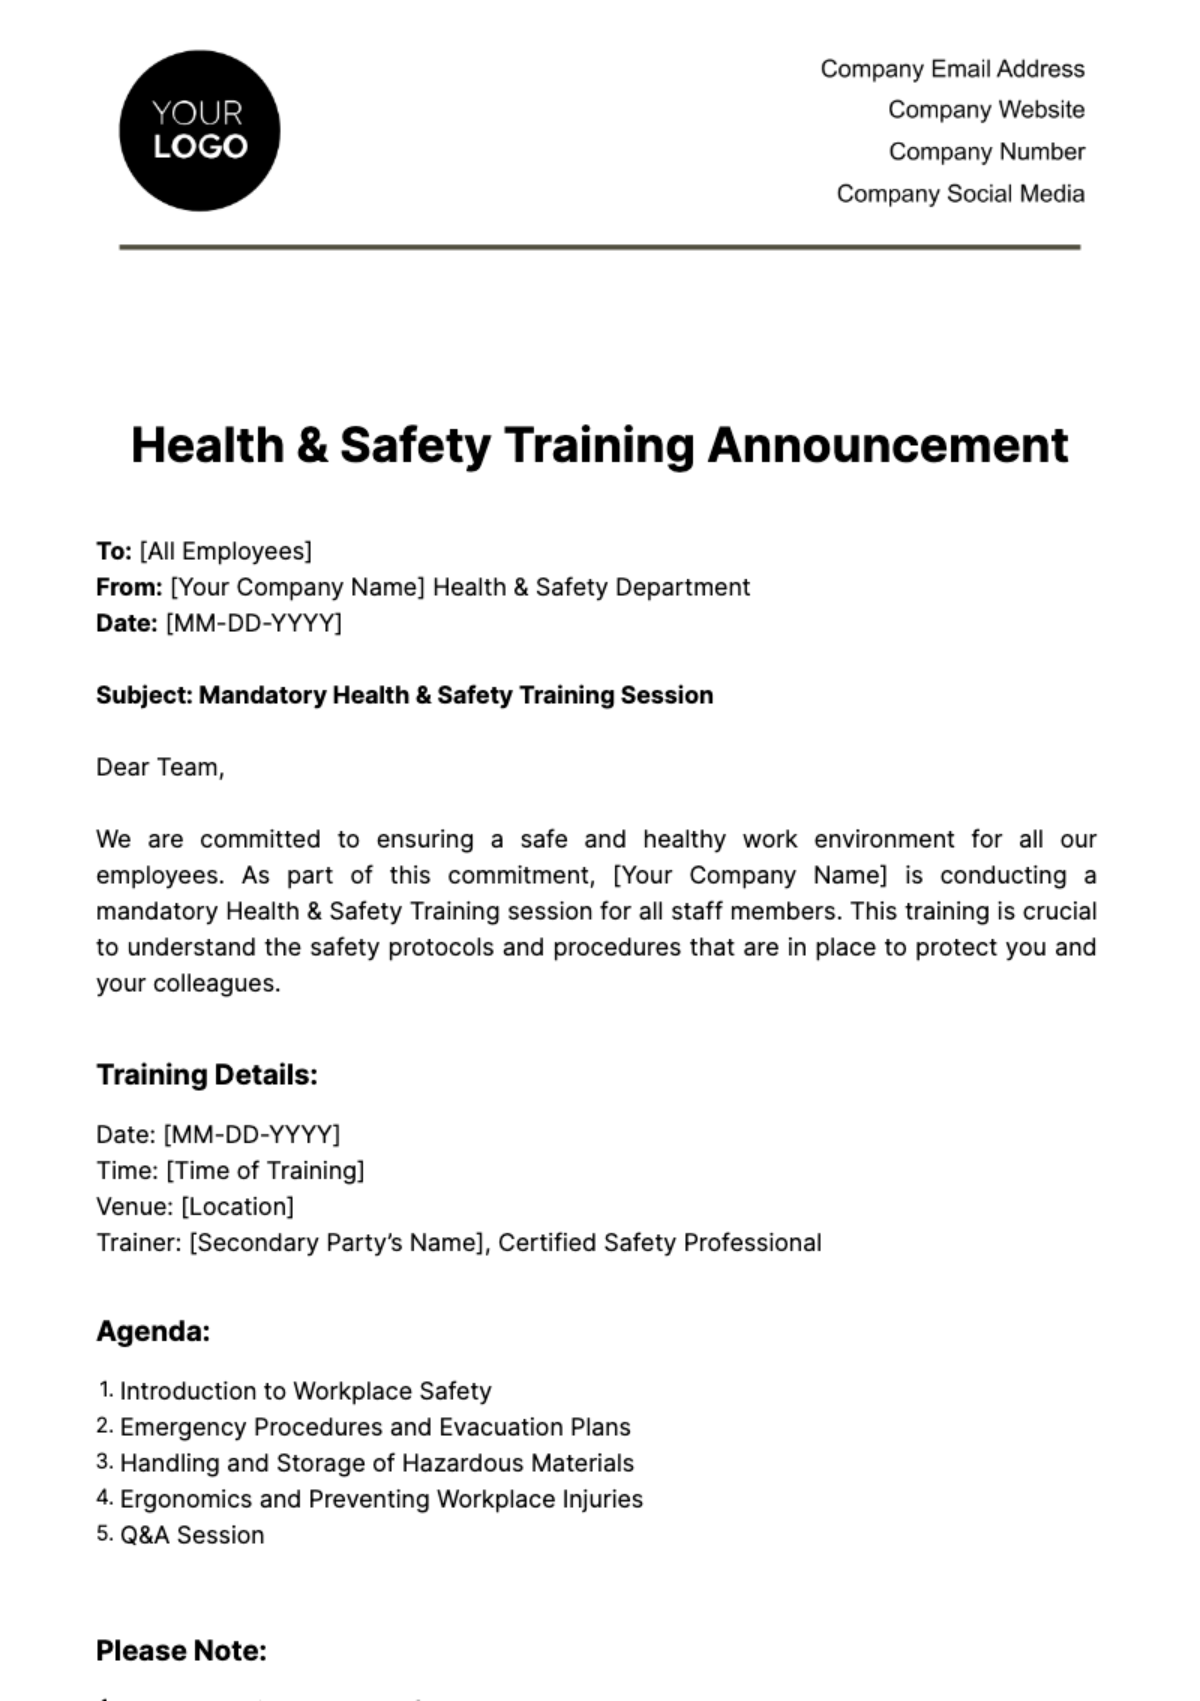 Health & Safety Training Announcement Template